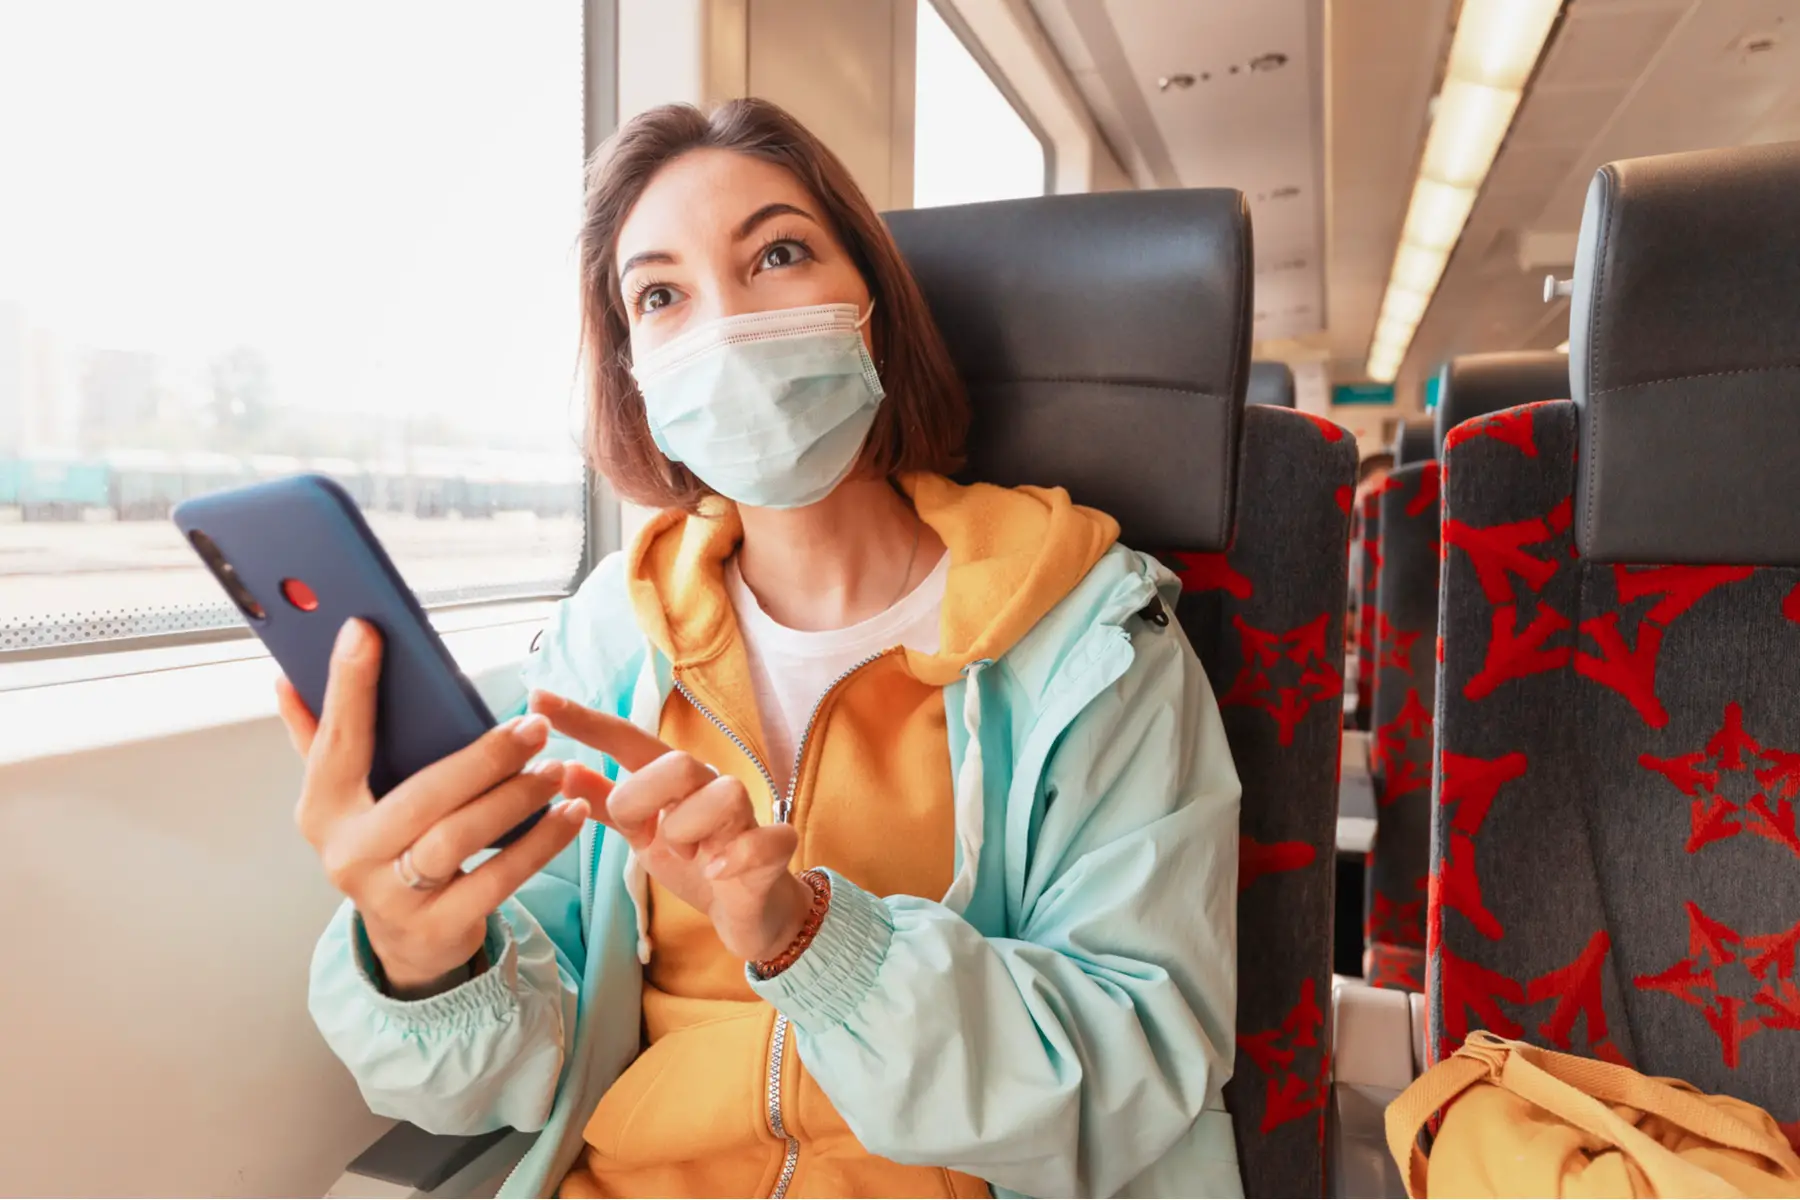 Woman wearing a mask while using her phone on a train